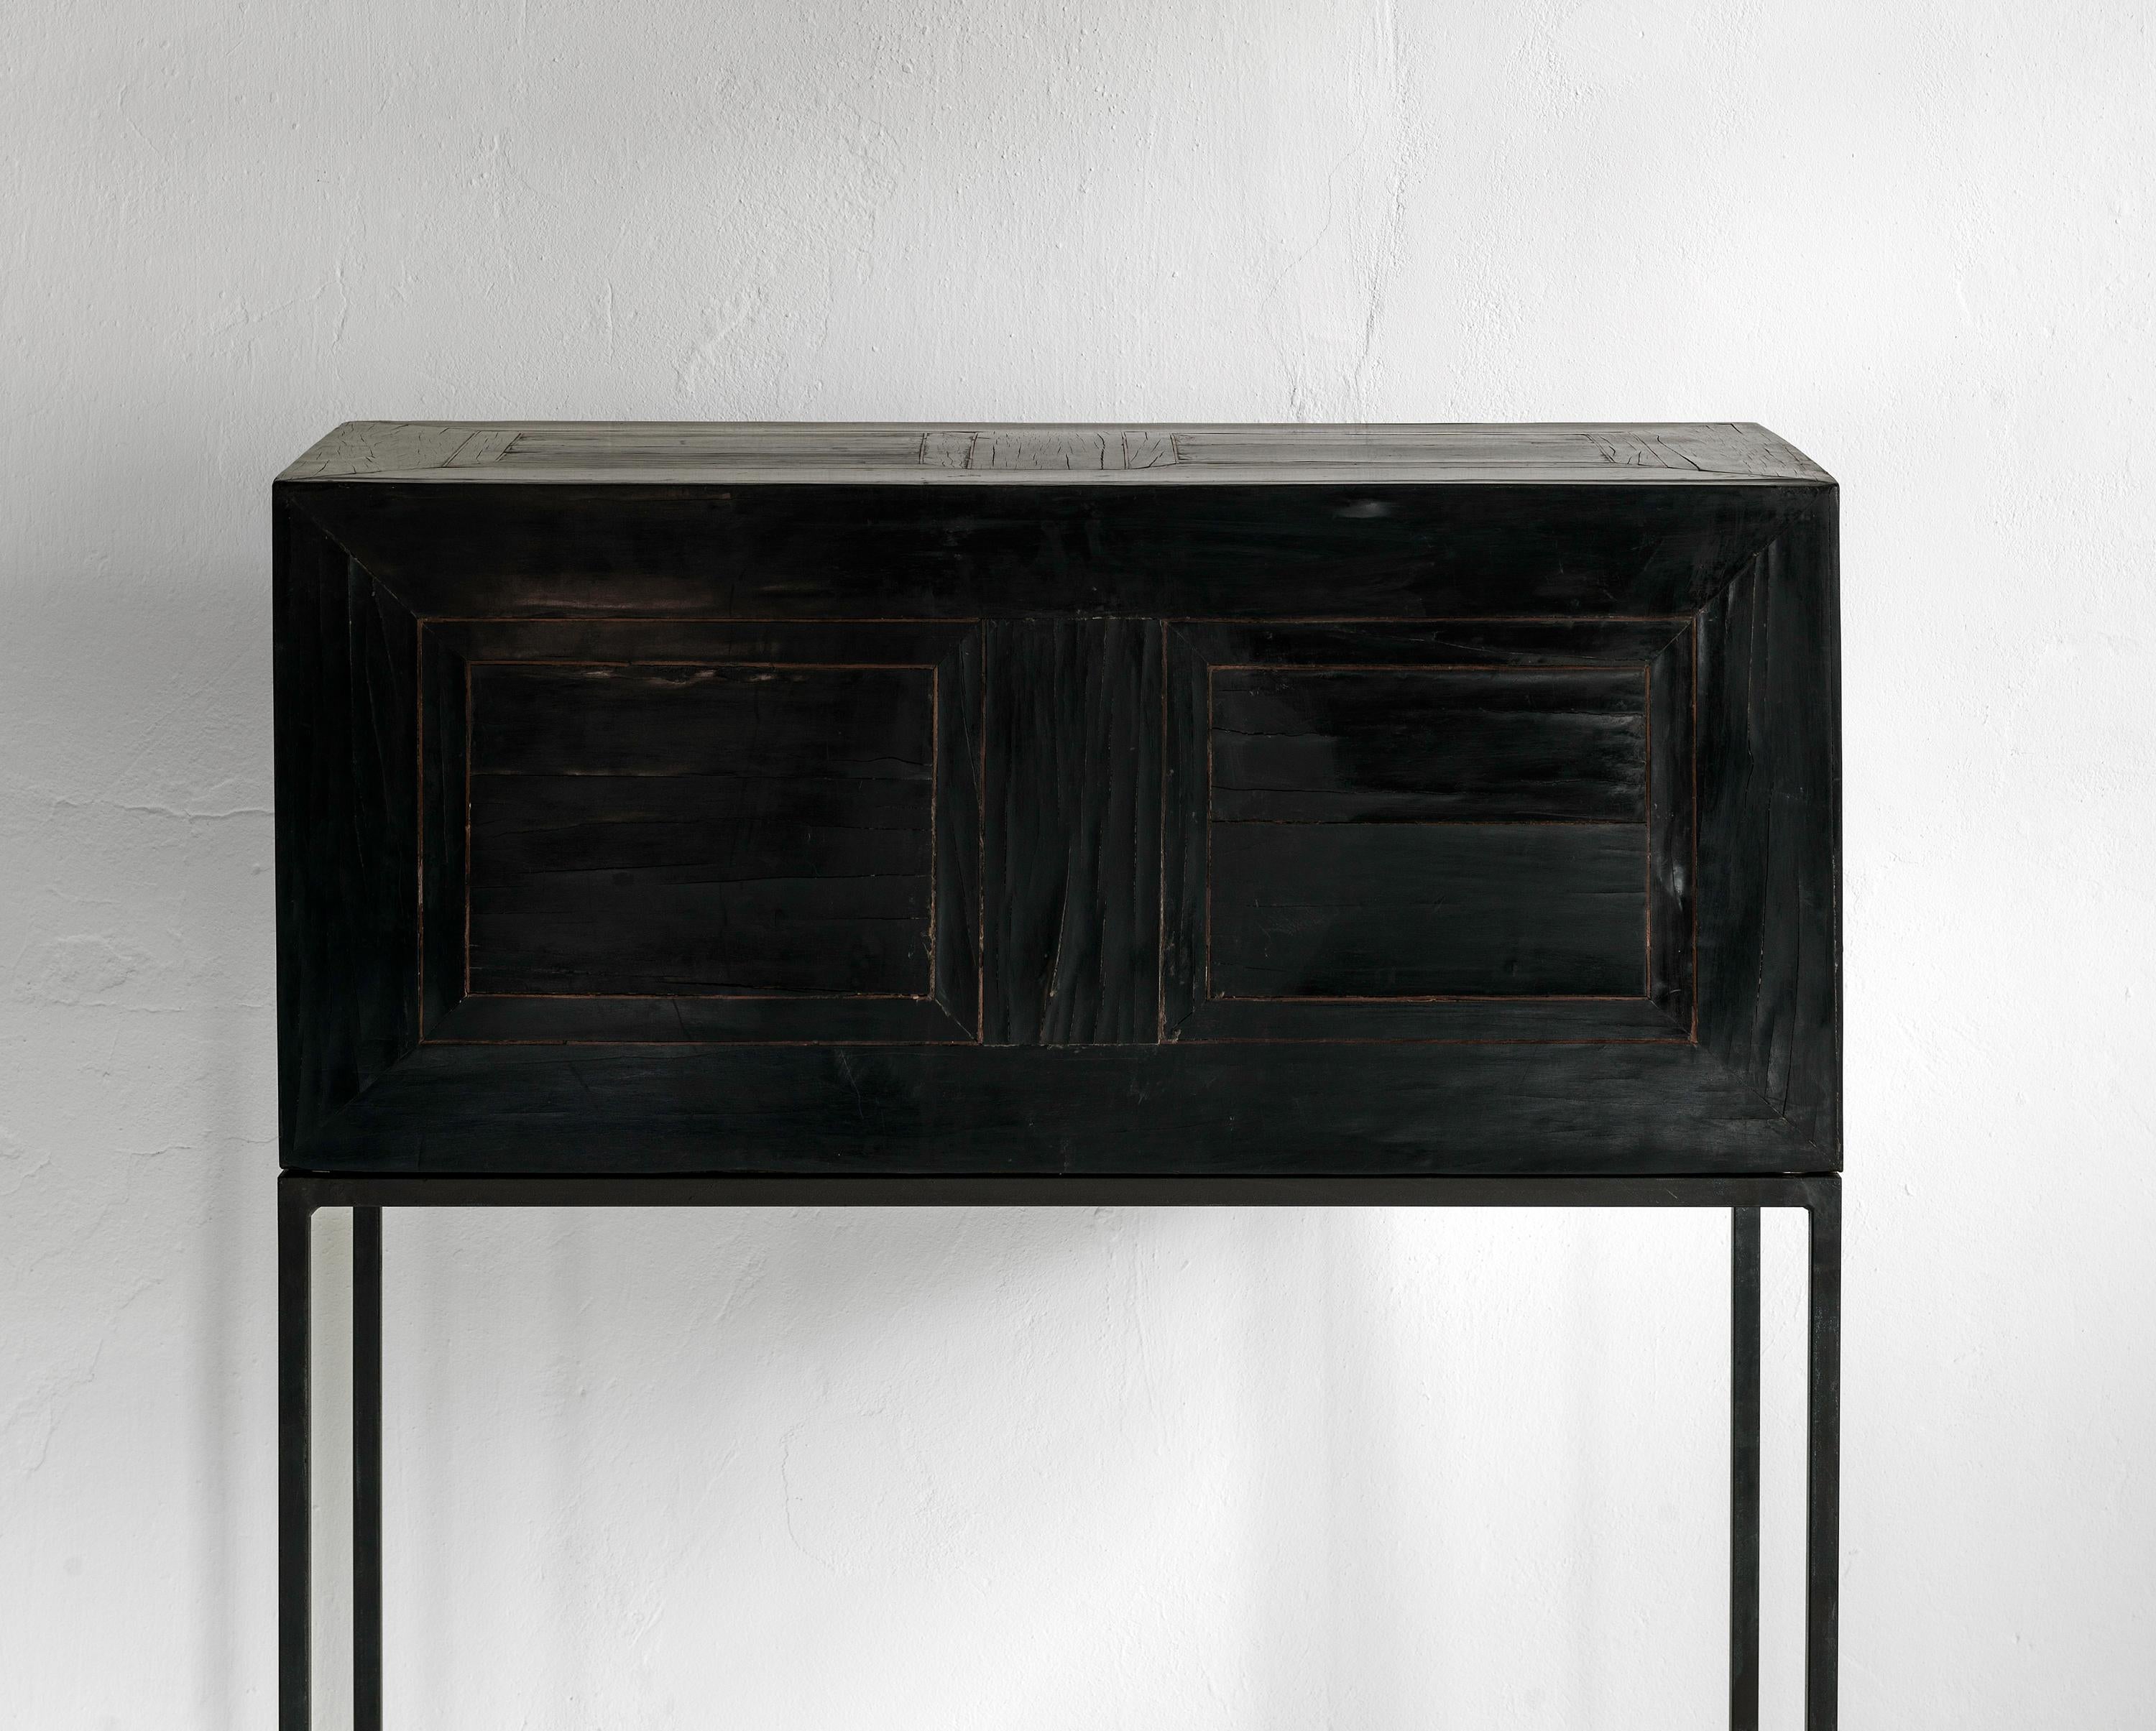 Belgian Elegant Minimalistic 17th Century Ebonized Cabinet on a Contemporary Steel Stand For Sale